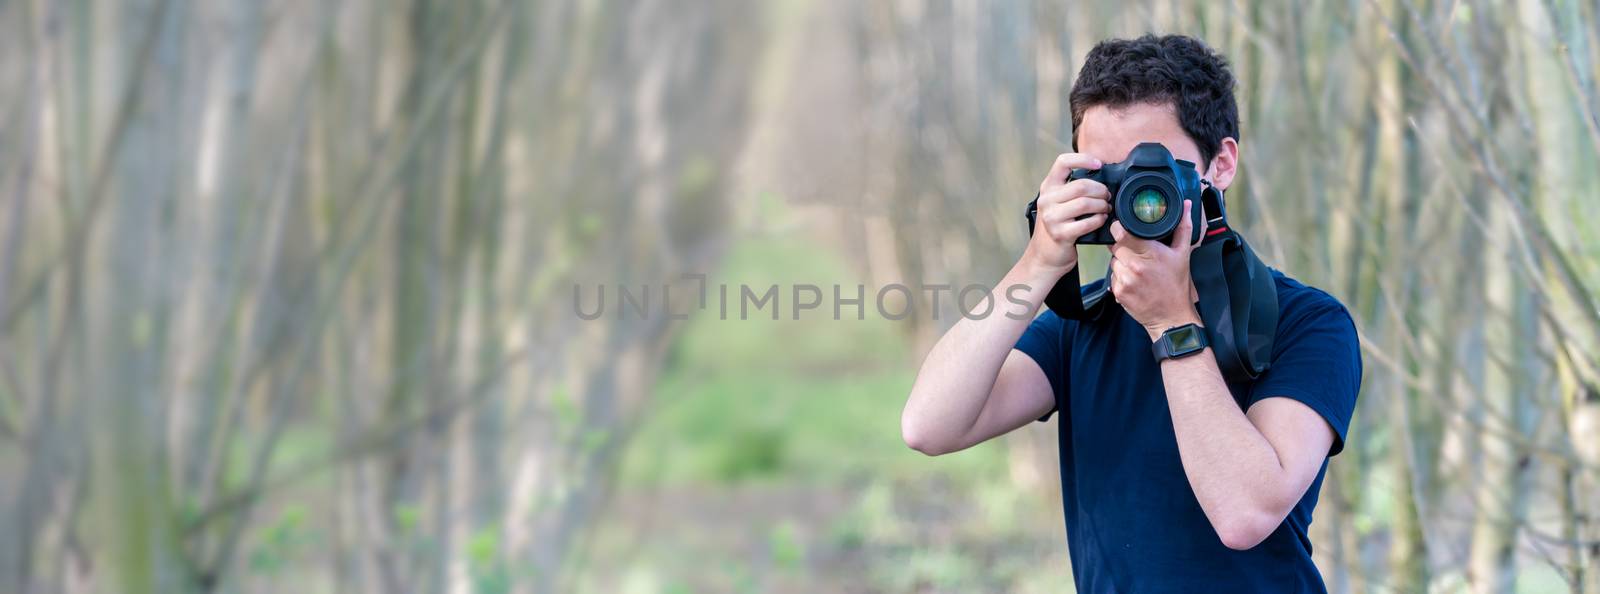 young man photographer in nature. copy space. banner by Edophoto